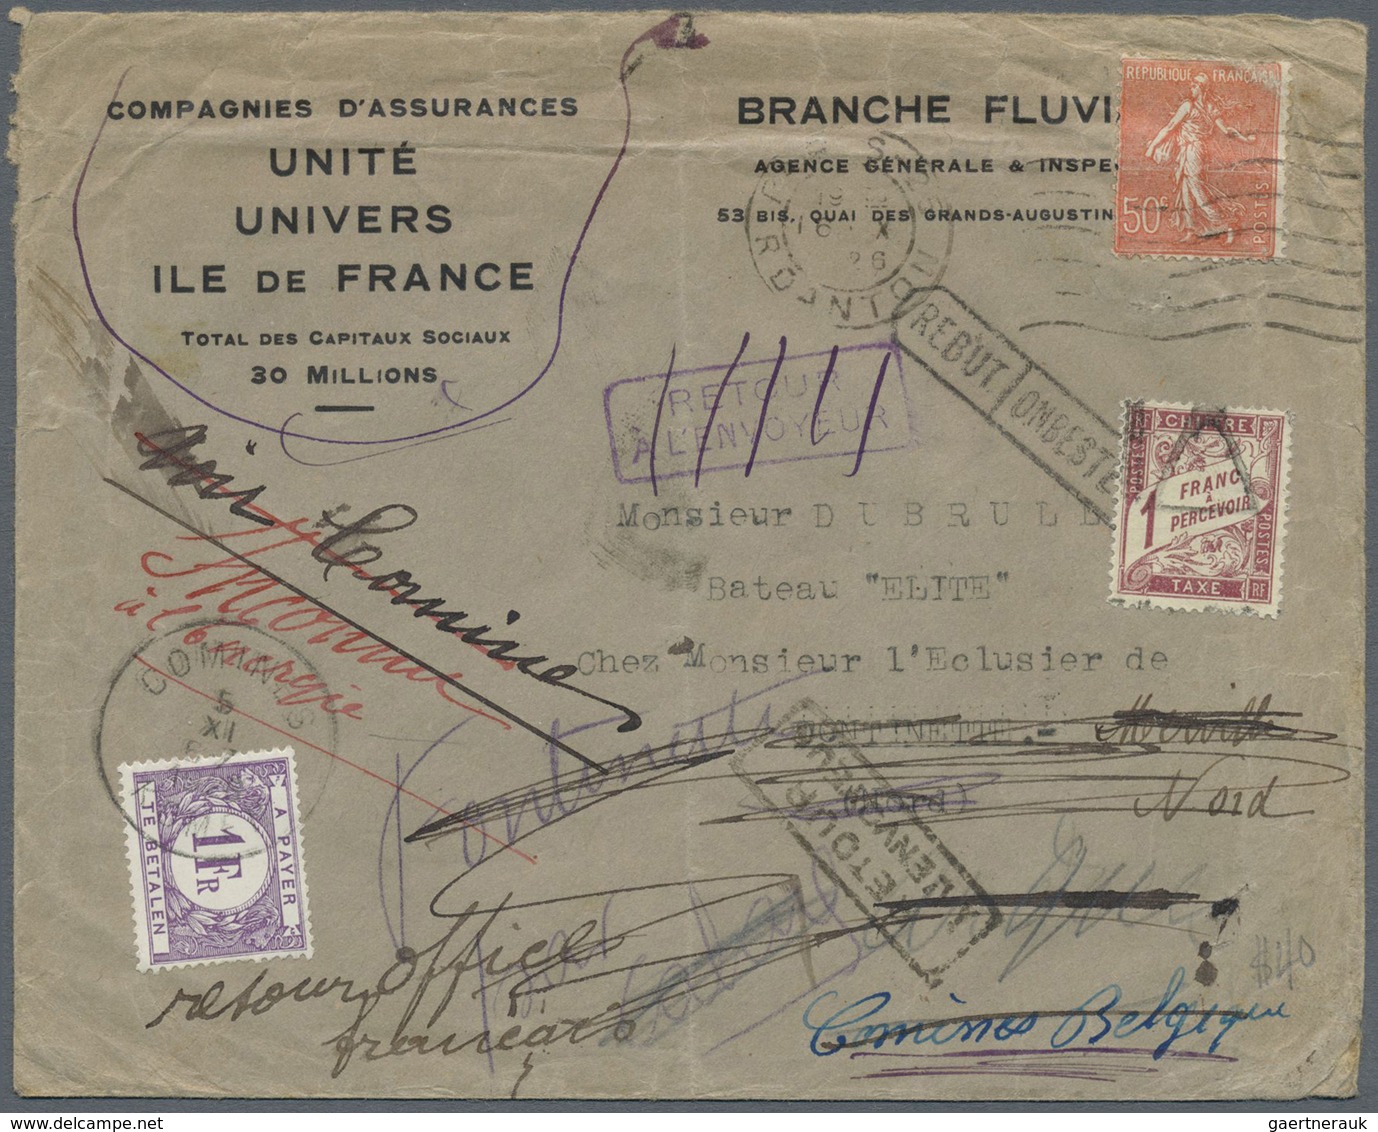 Br Frankreich - Portomarken: 1850/1980 (ca.), insufficiently paid domestic mail, holding of apprx. 230